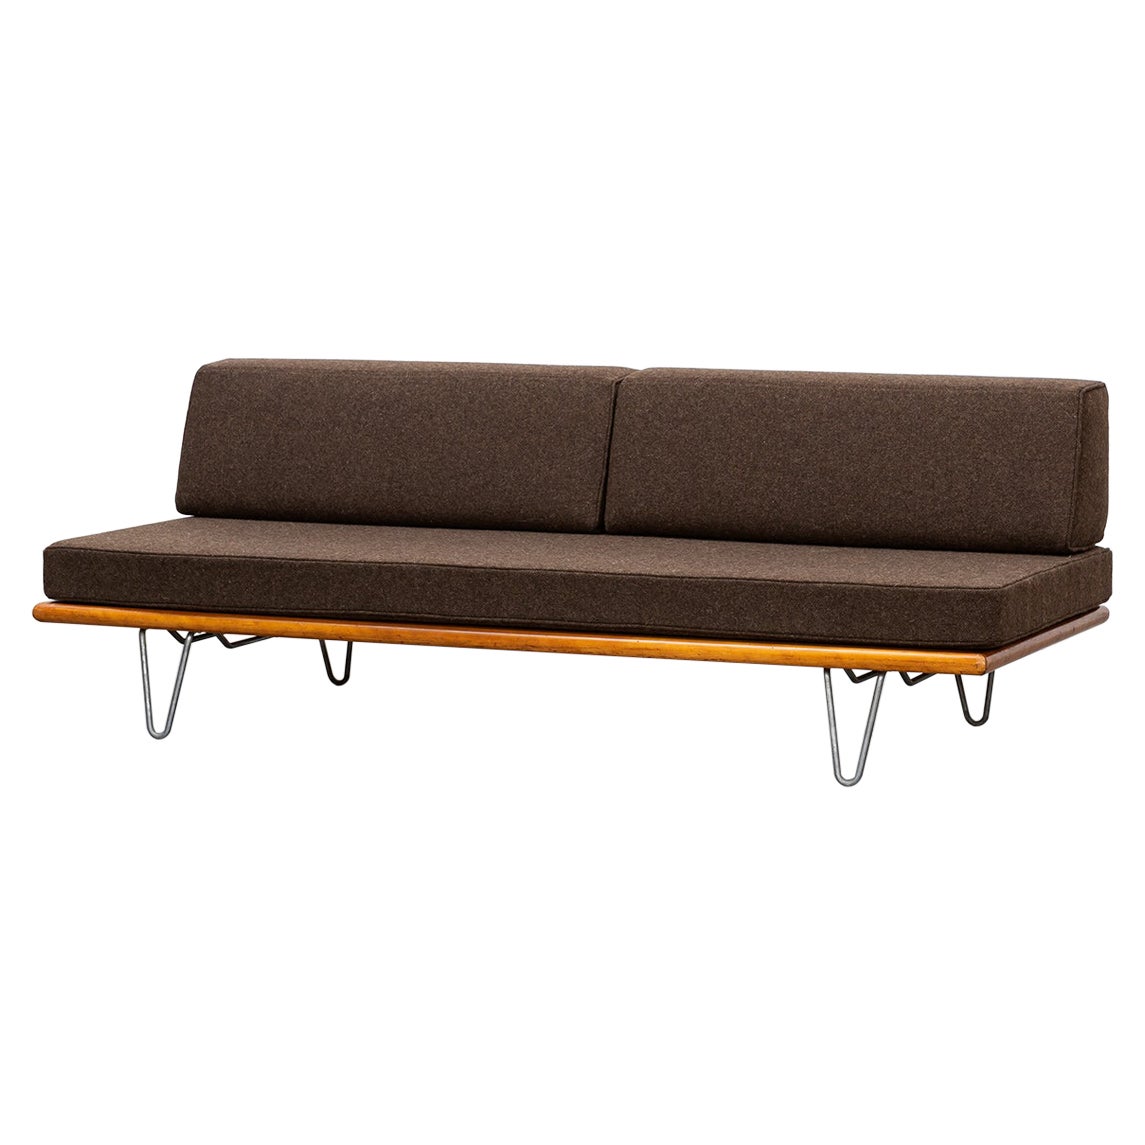 1950s Grey Fabric on Metal Legs Daybed by George Nelson